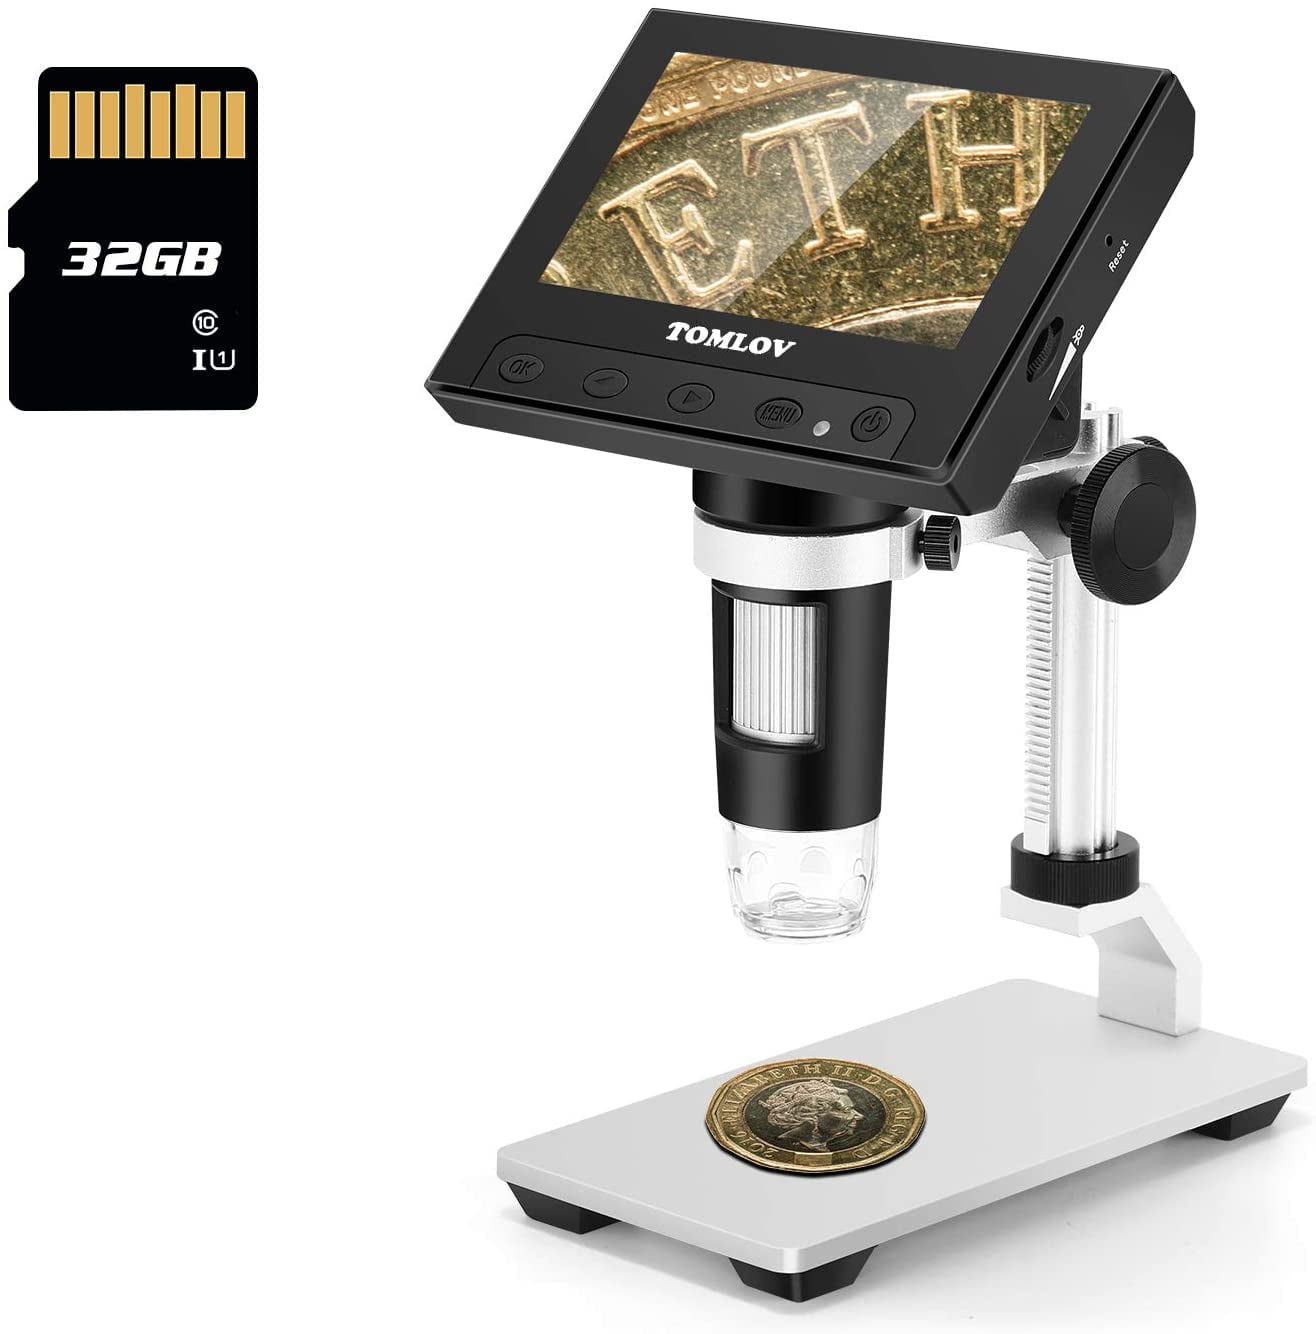 Mustcam 5M Handheld Mobile LCD Digital Microscope up to 1200x by Digital Magnification Photo and Video Capture Micro-SD Storage 